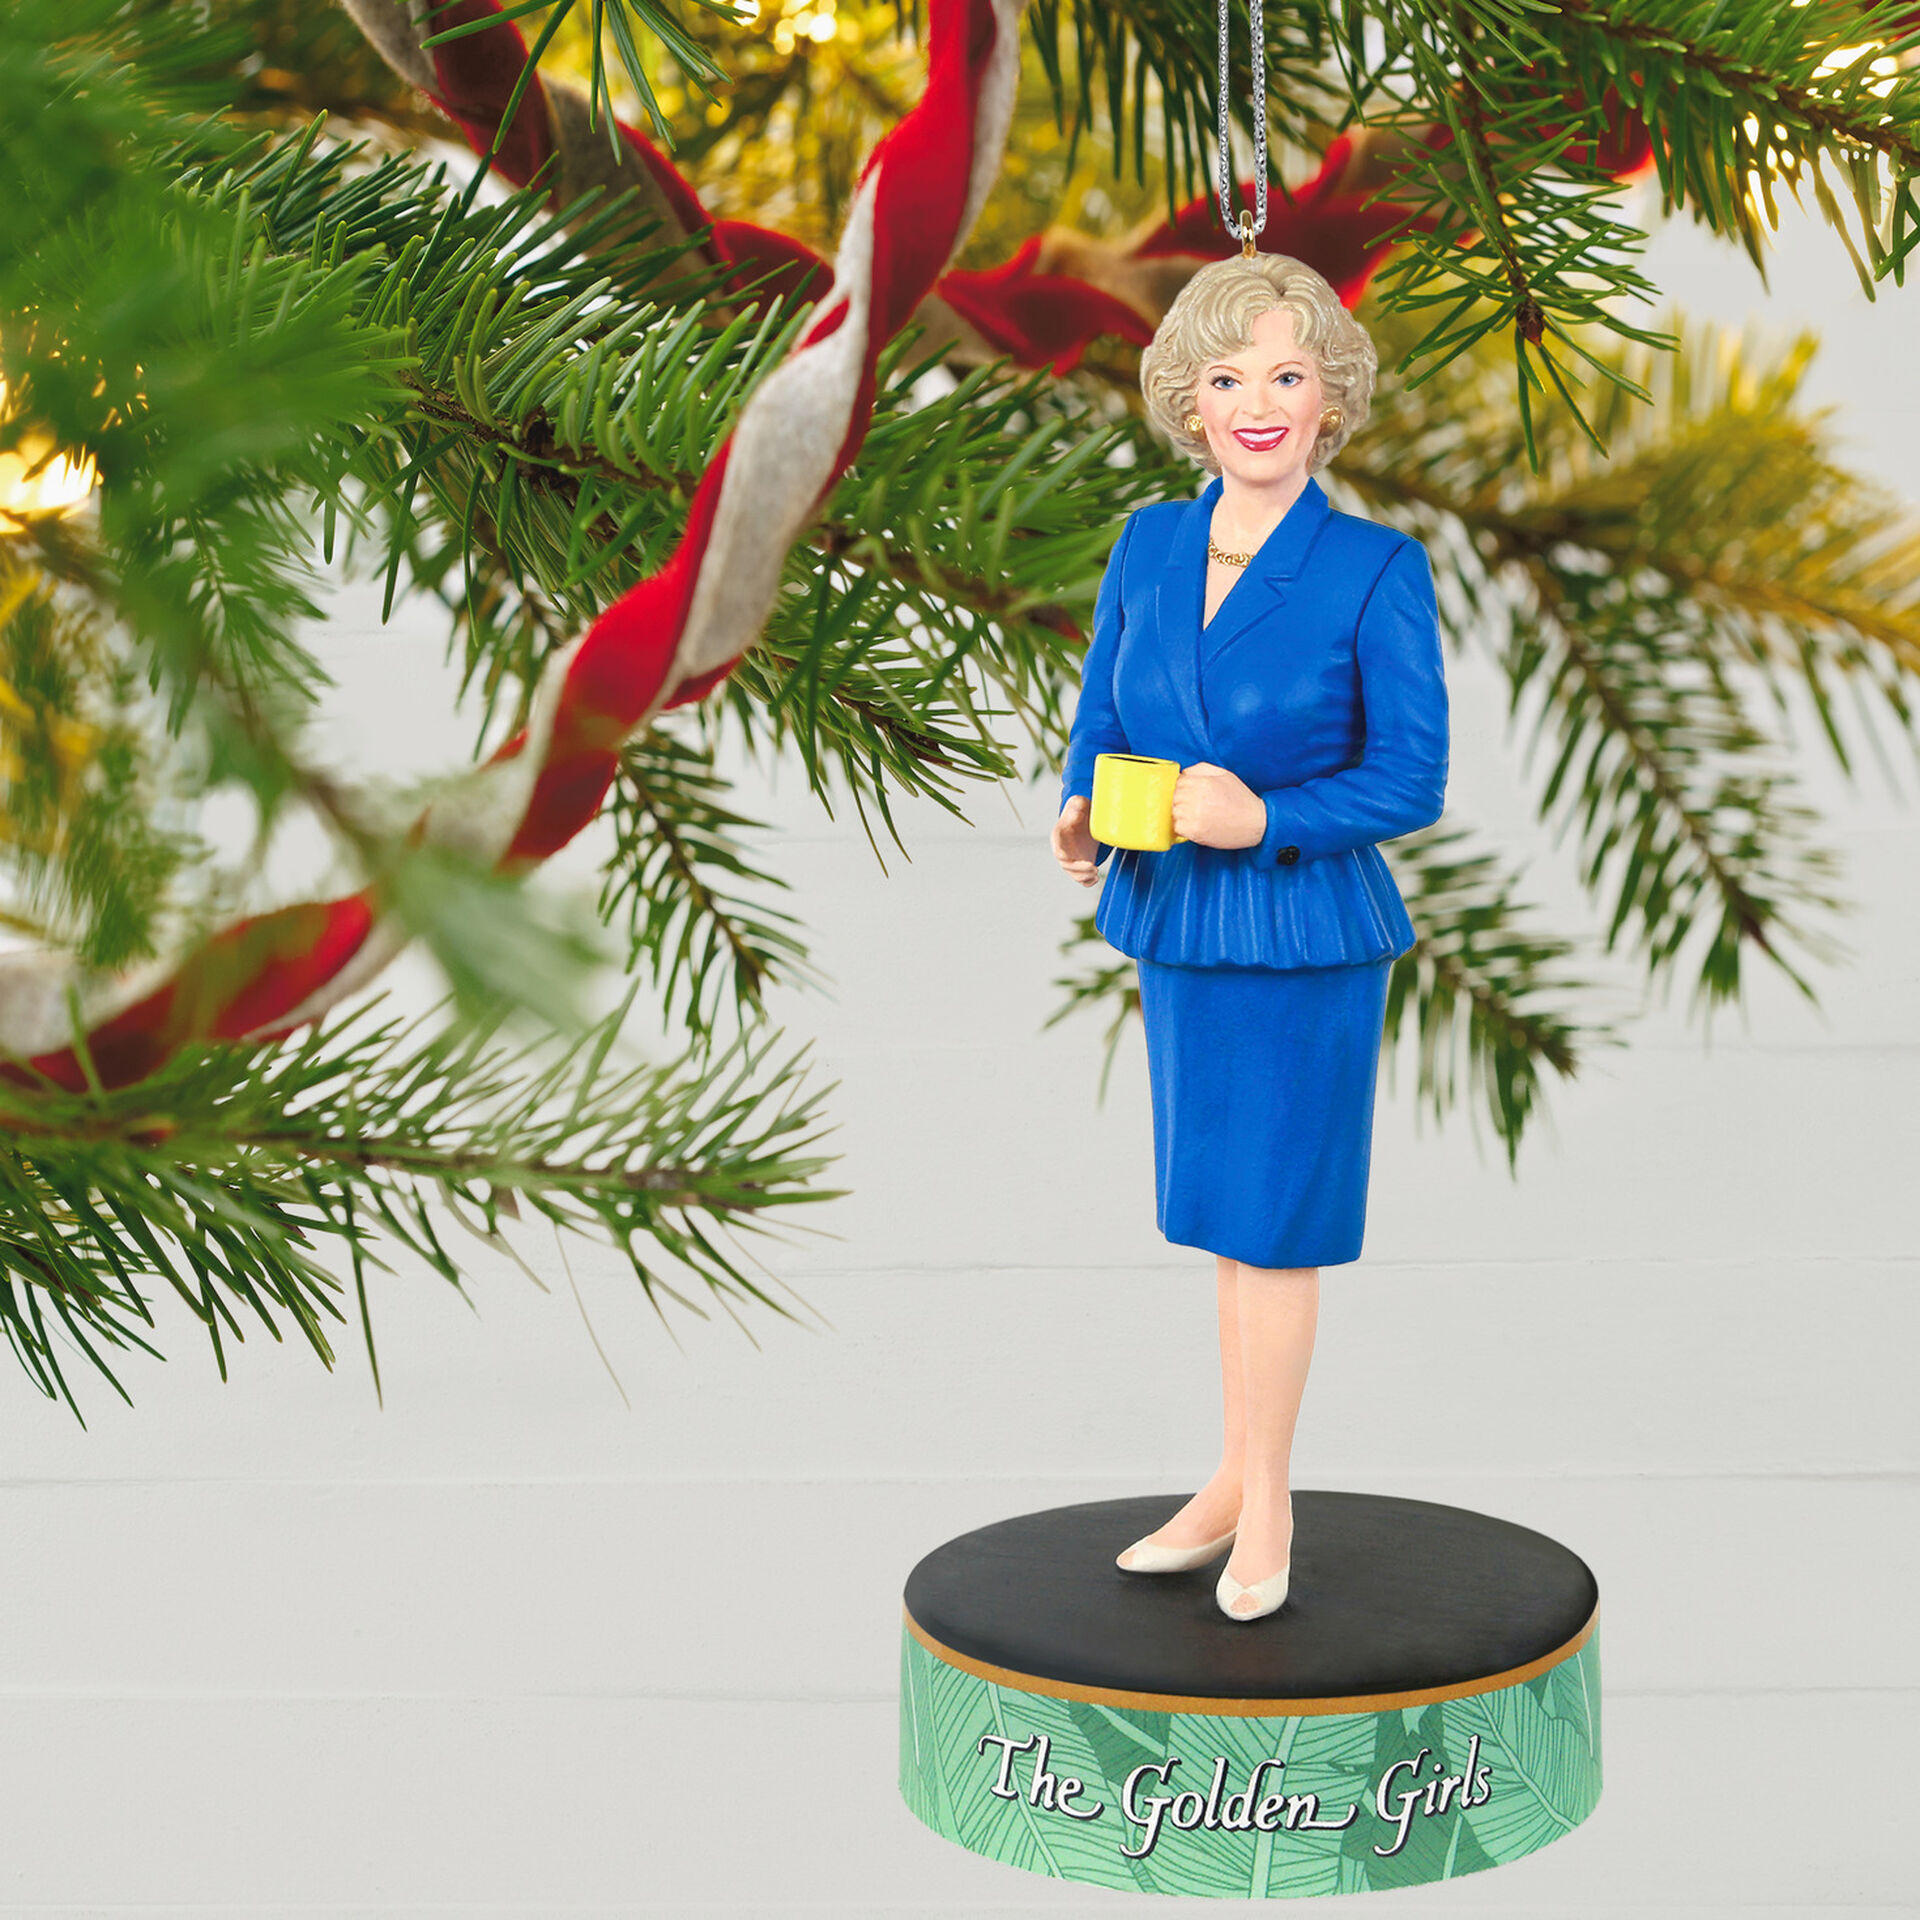 graduation christmas ornament 2020 The Golden Girls Rose Nylund Ornament With Sound Keepsake Ornaments Hallmark graduation christmas ornament 2020